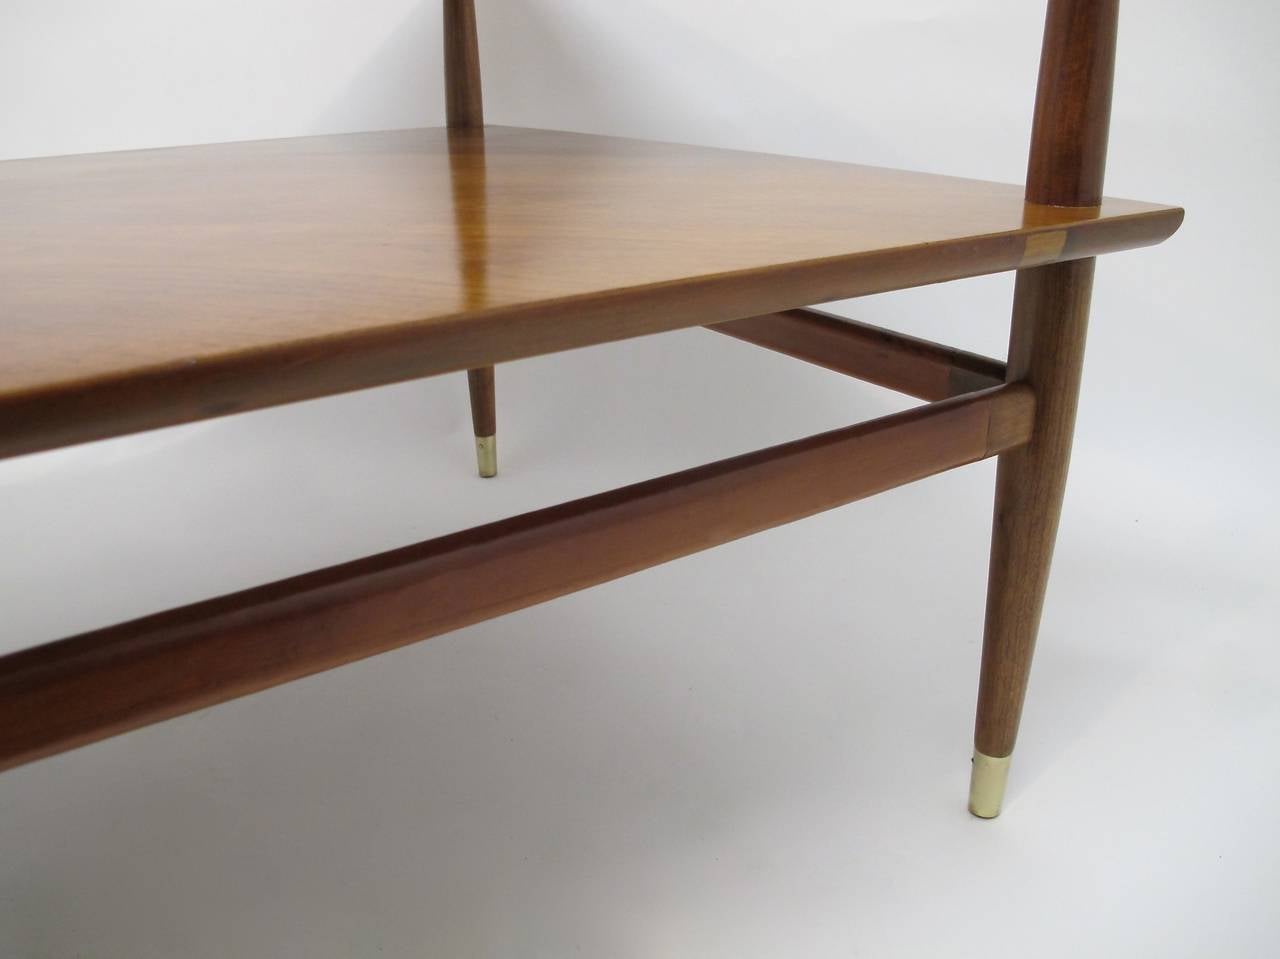 Henredon Mid Century Walnut and Leather Side Table. Top shelf is leather wrapped with exposed wood corners, as well as stretchers are partially leather wrapped. Tapered cylindrical legs ending with brass caps. Mid 20th century Henredon Heritage